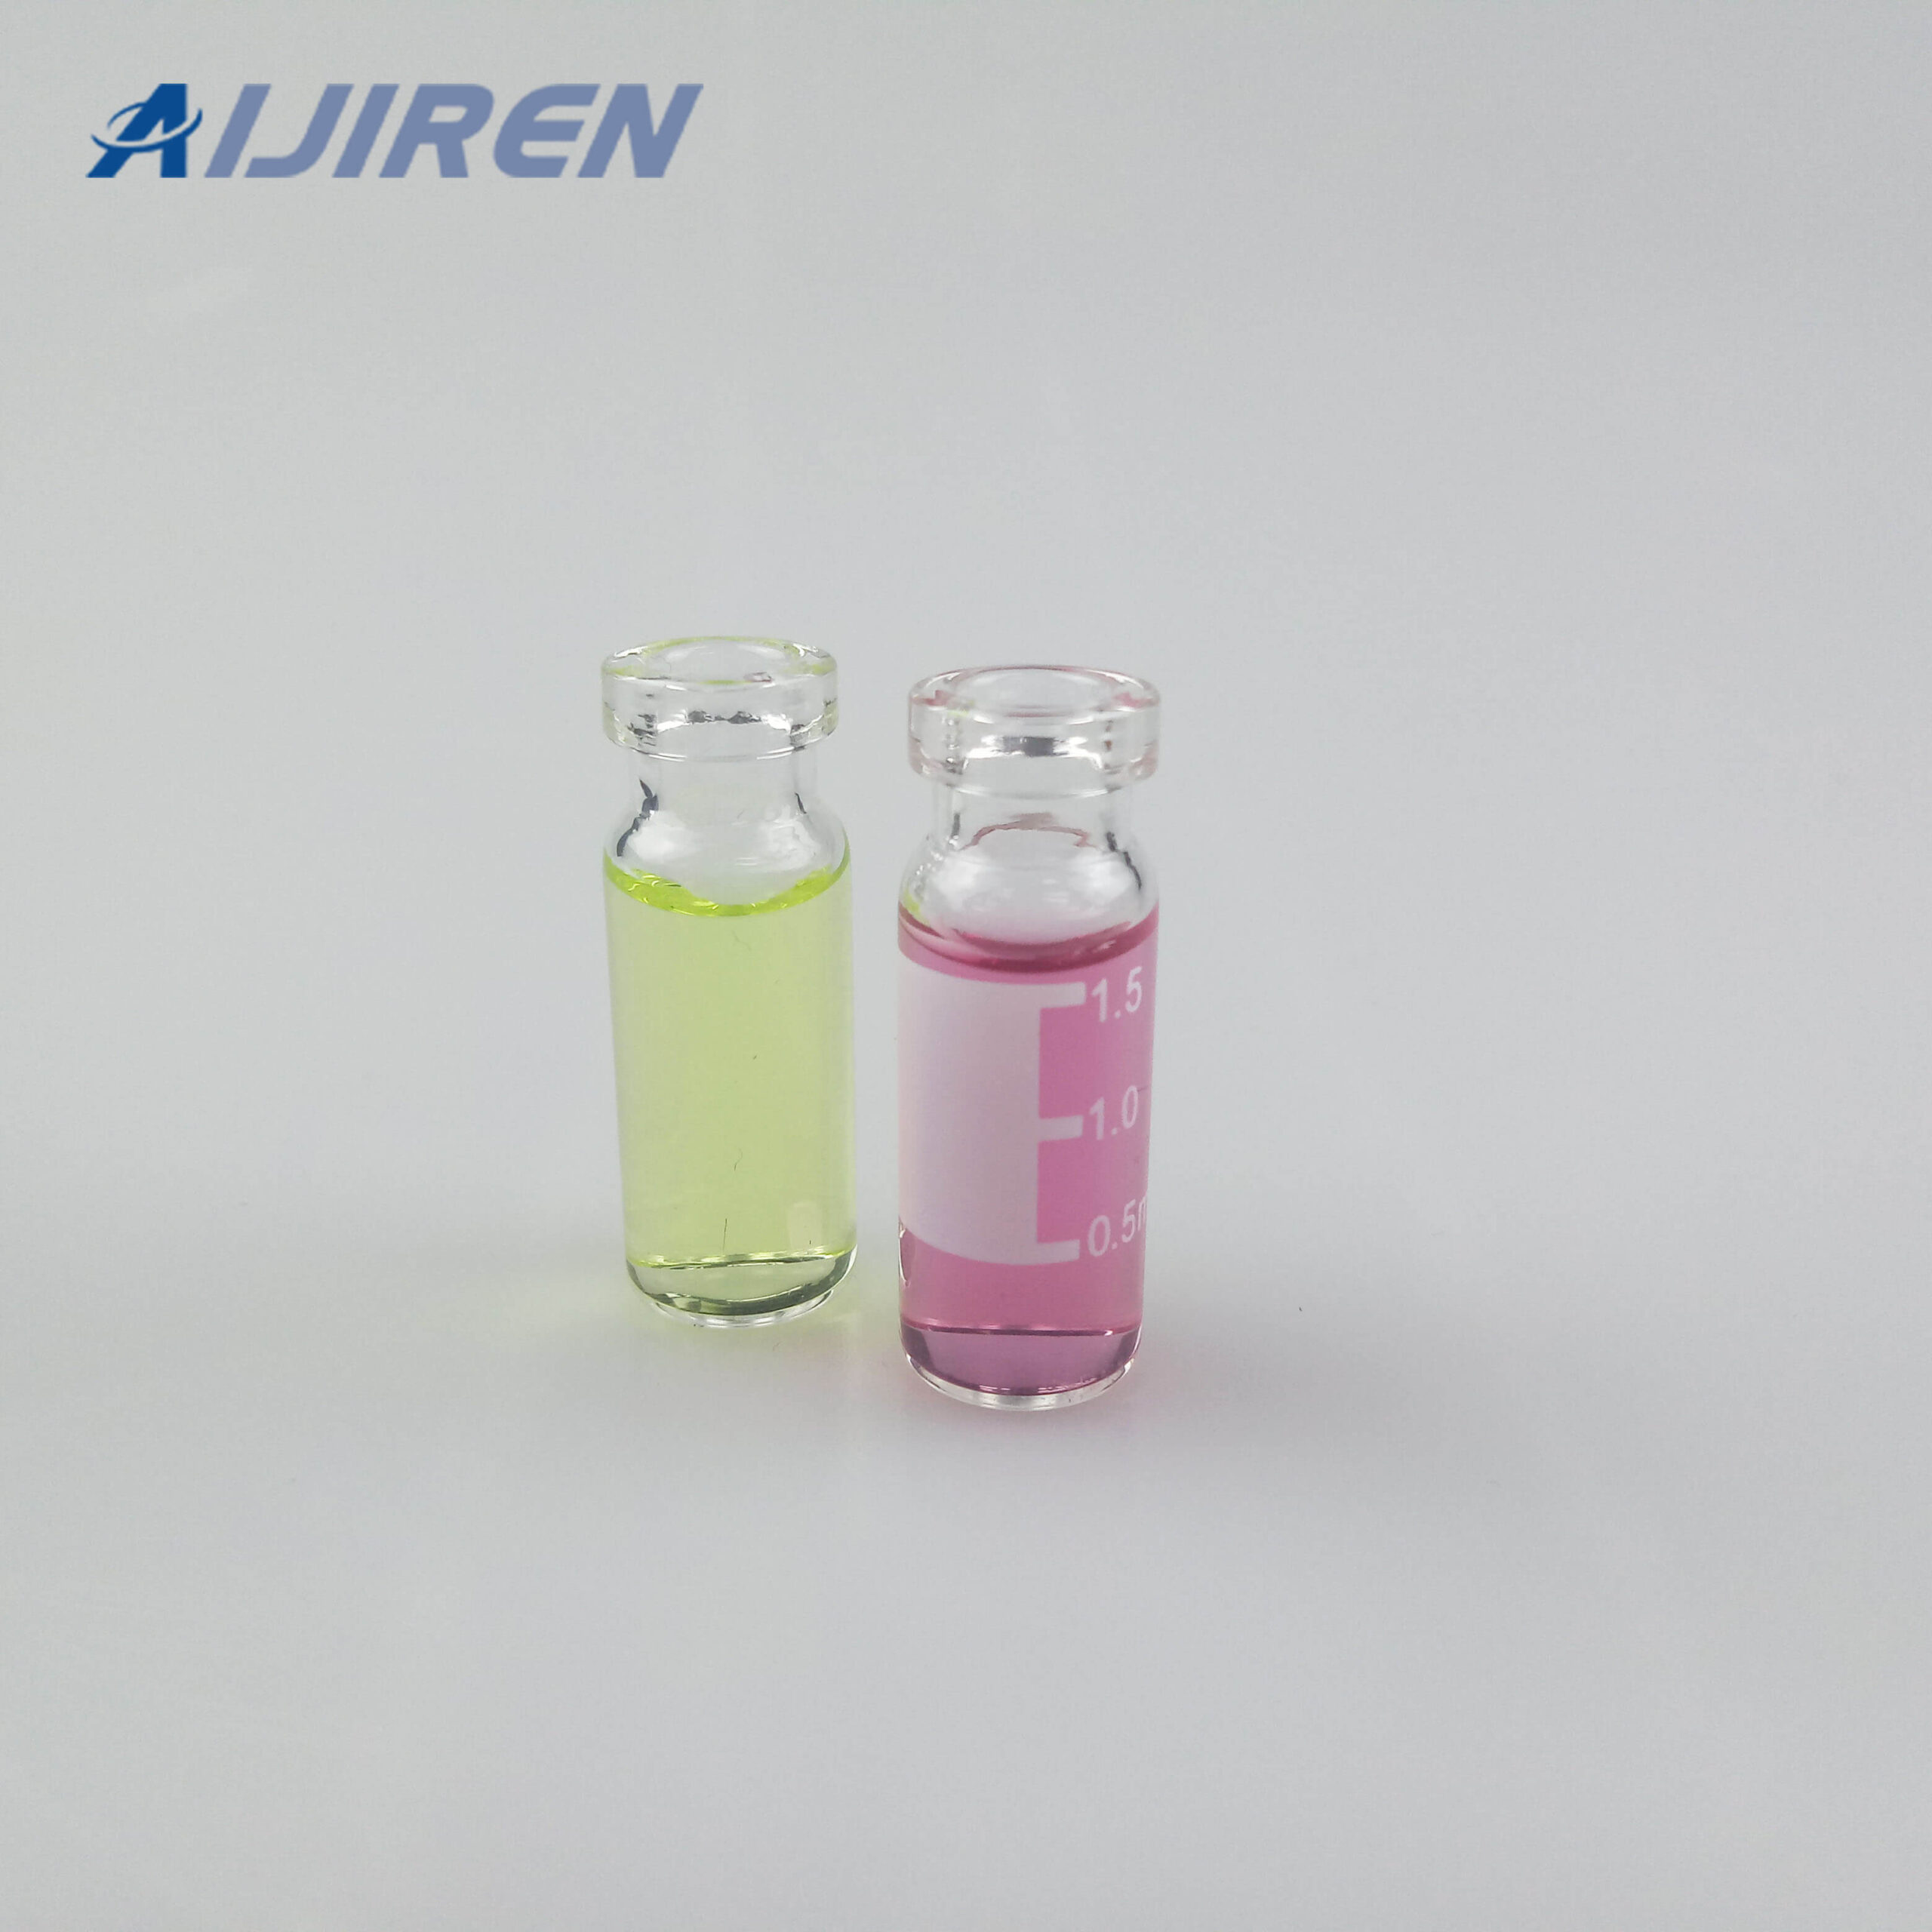 20ml headspace vial2ml Crimp Top Glass Vial suitable for Autosampler